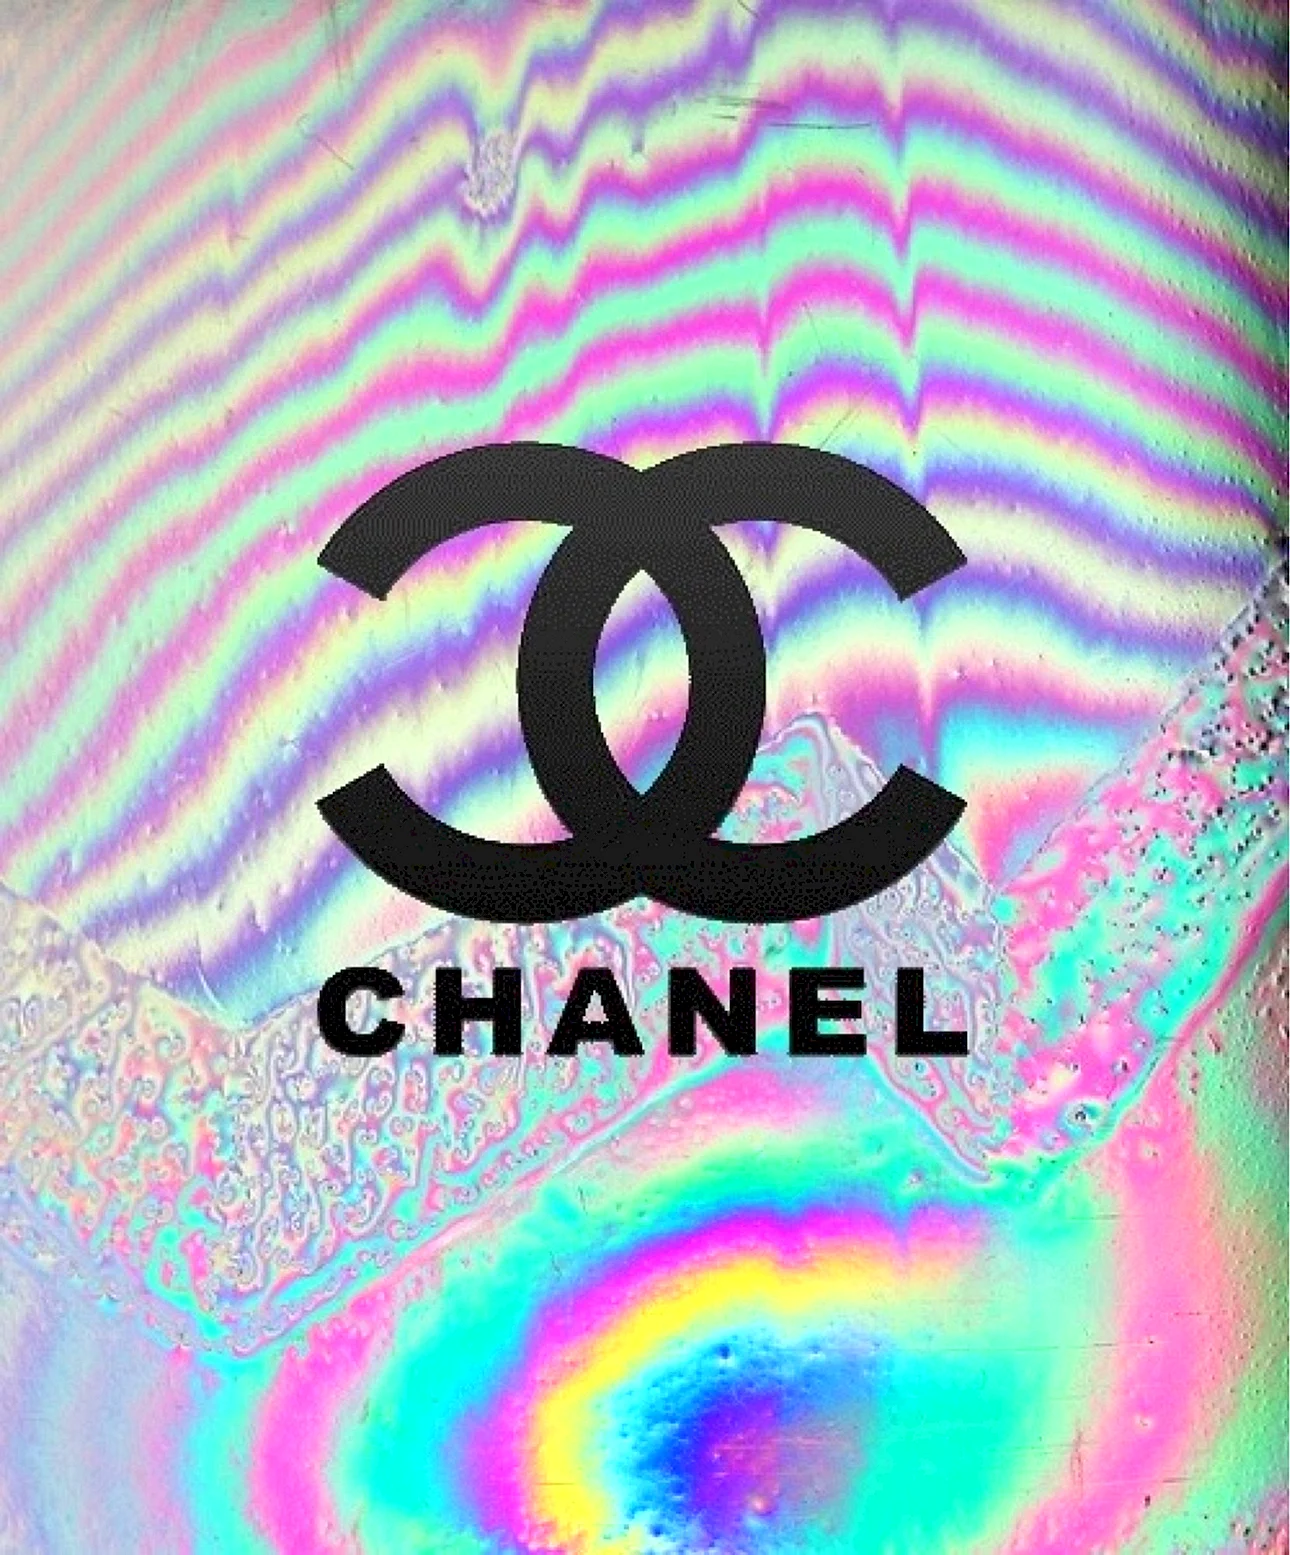 Chanel Grunge Logo Wallpaper For iPhone